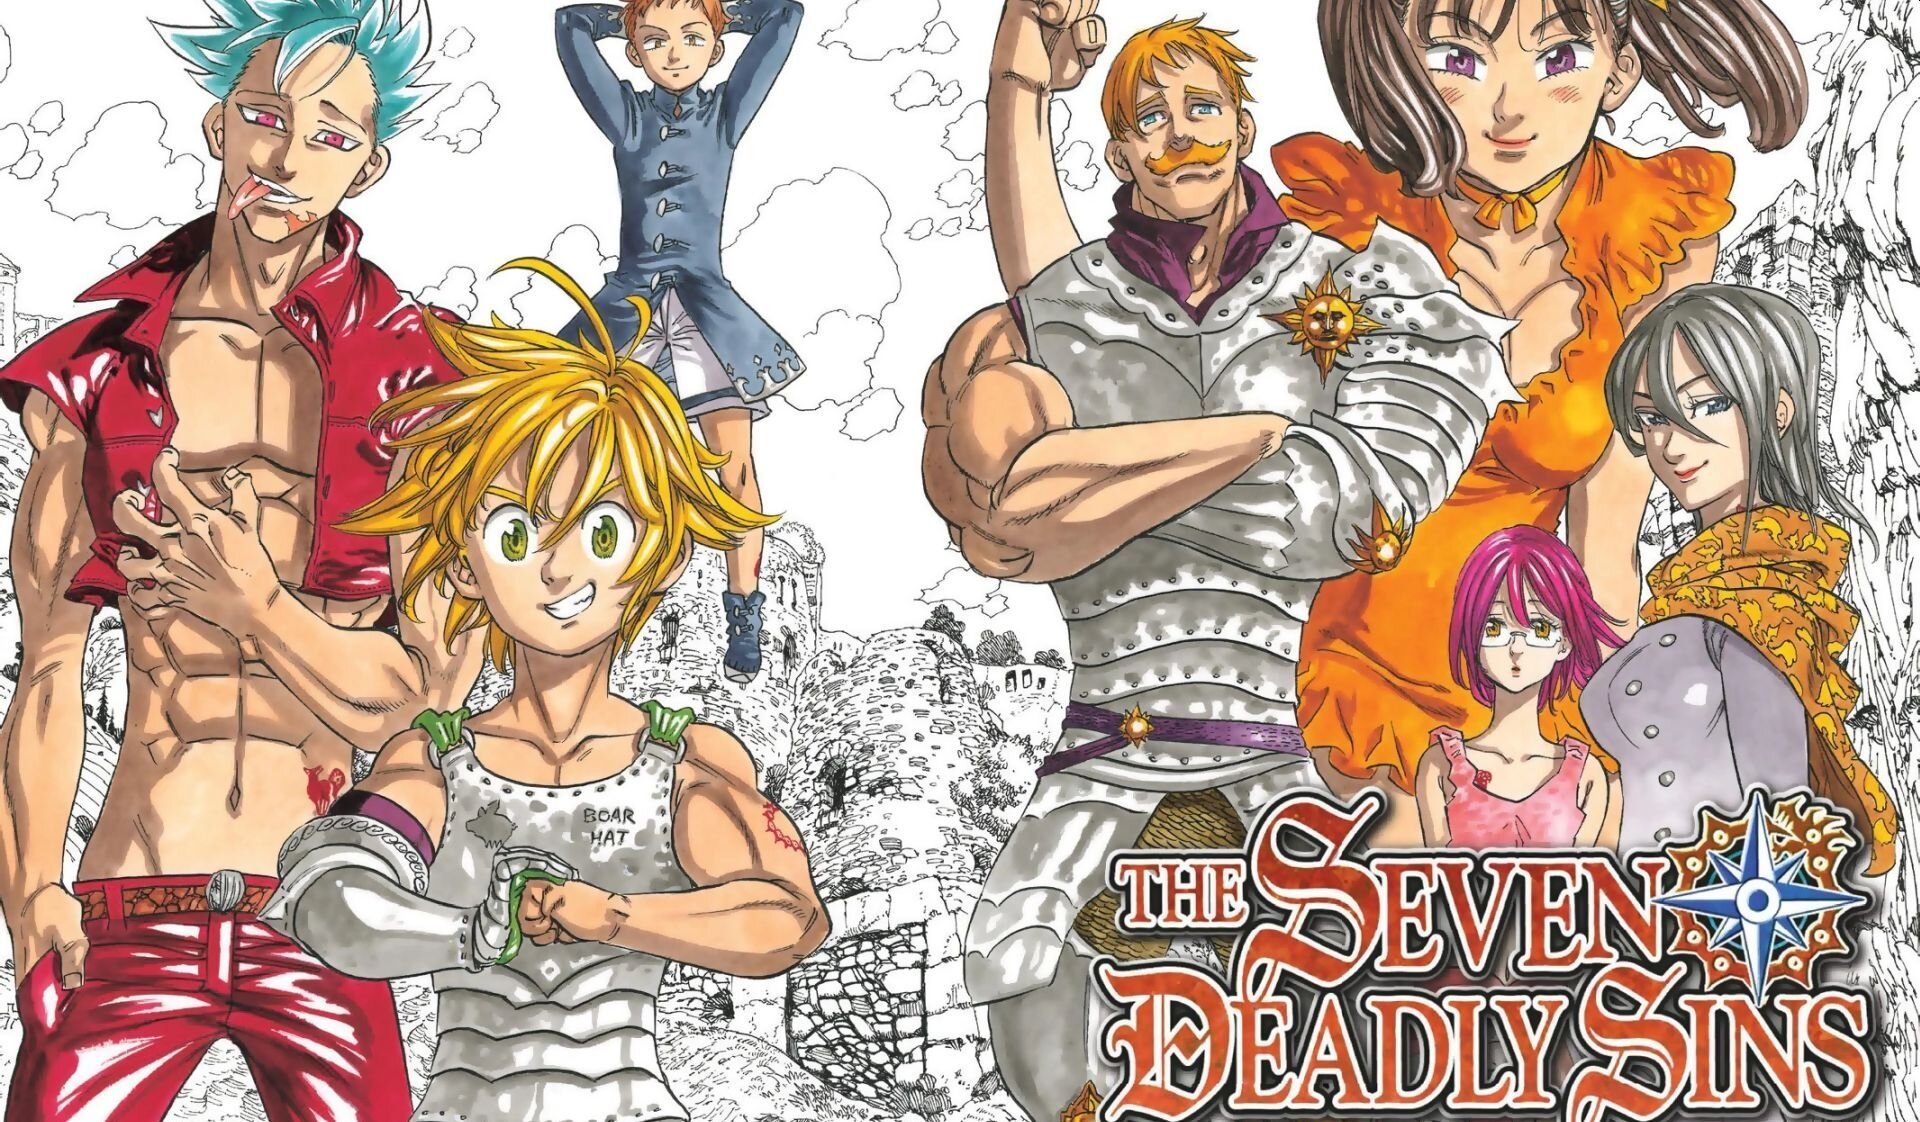 A Closer Look at the Seven Deadly Sins Characters